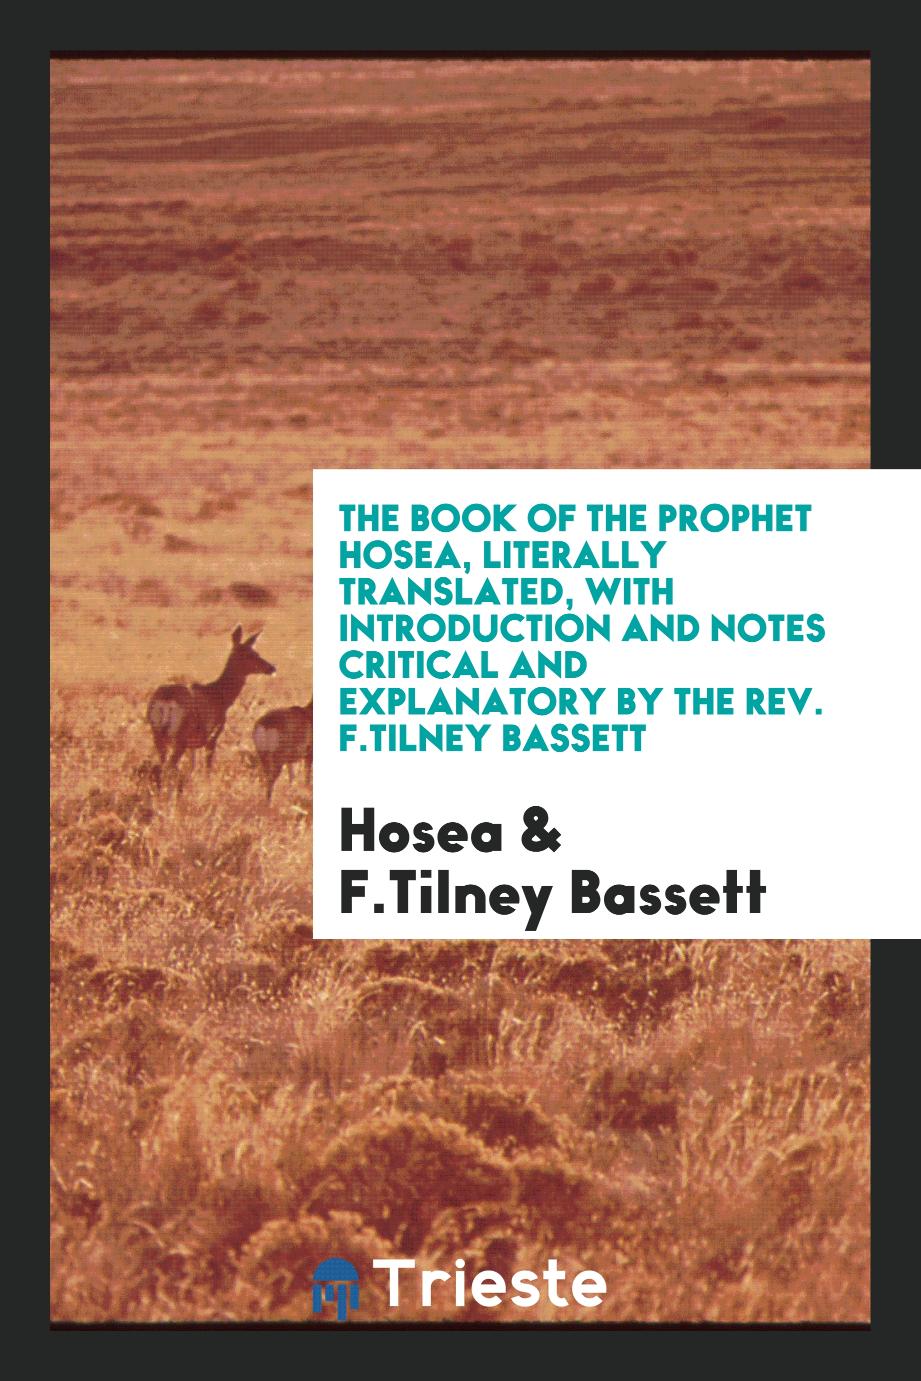 The Book of the Prophet Hosea, Literally Translated, with Introduction and Notes Critical and Explanatory by the Rev. F.Tilney Bassett